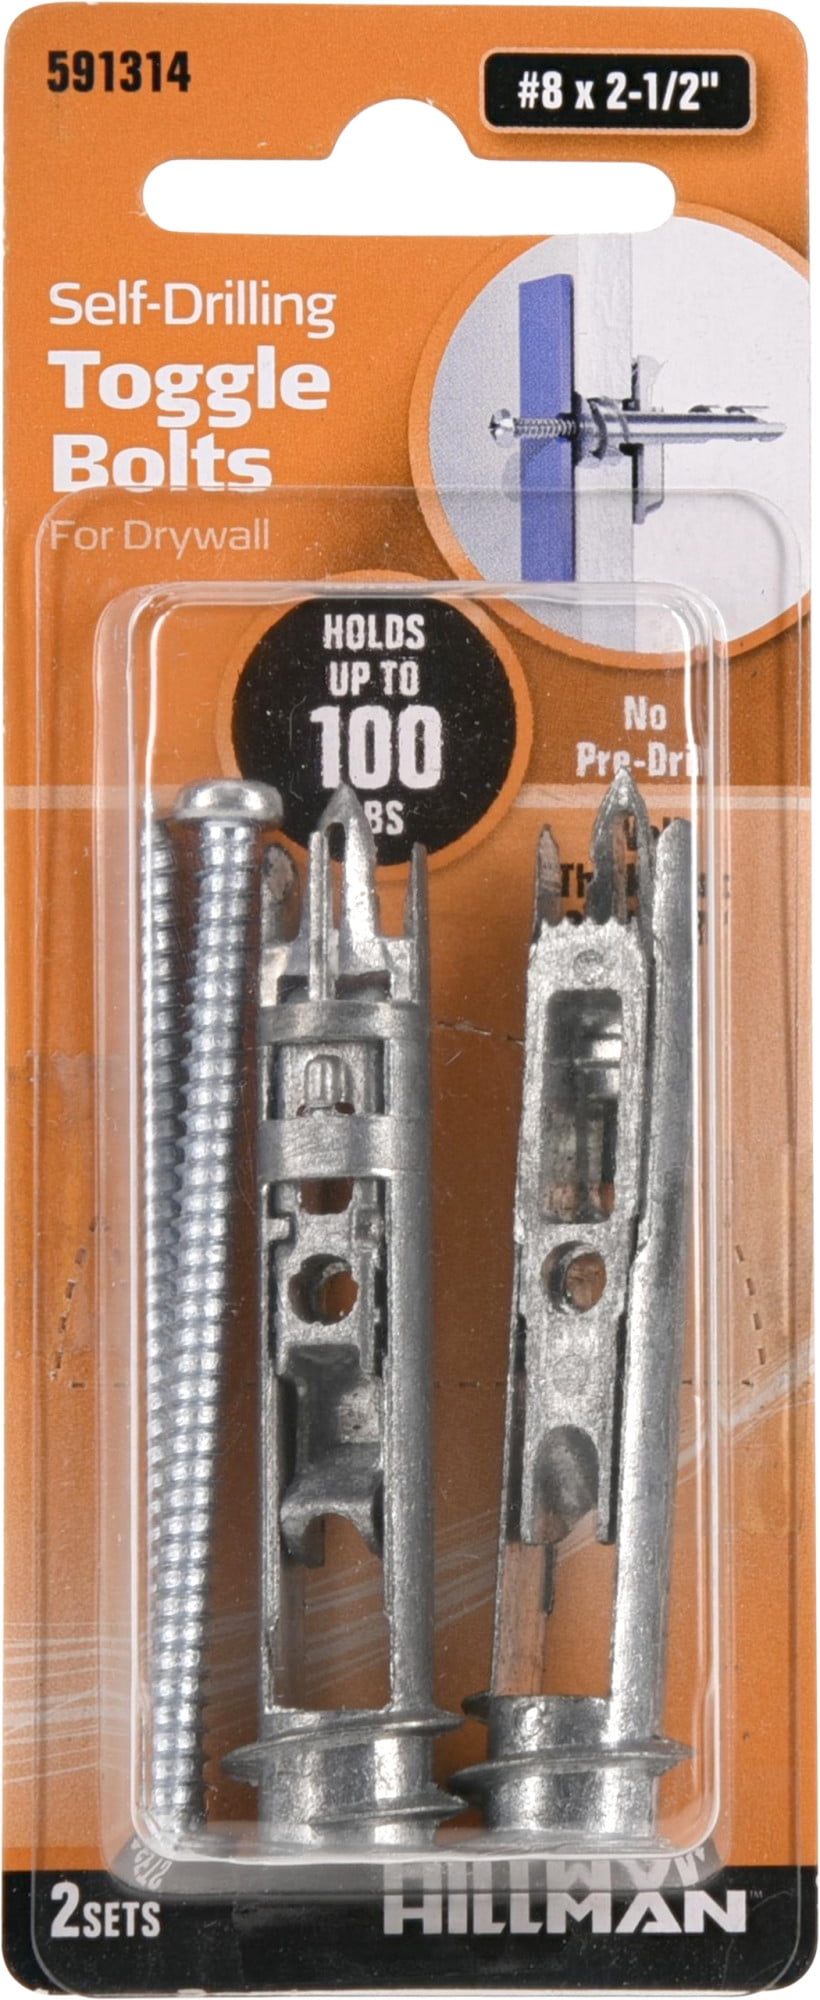 Hillman Fastener Toggle Bolt Anchor Hollow Wall 1/8” x 2” Long screw Lot of 5 